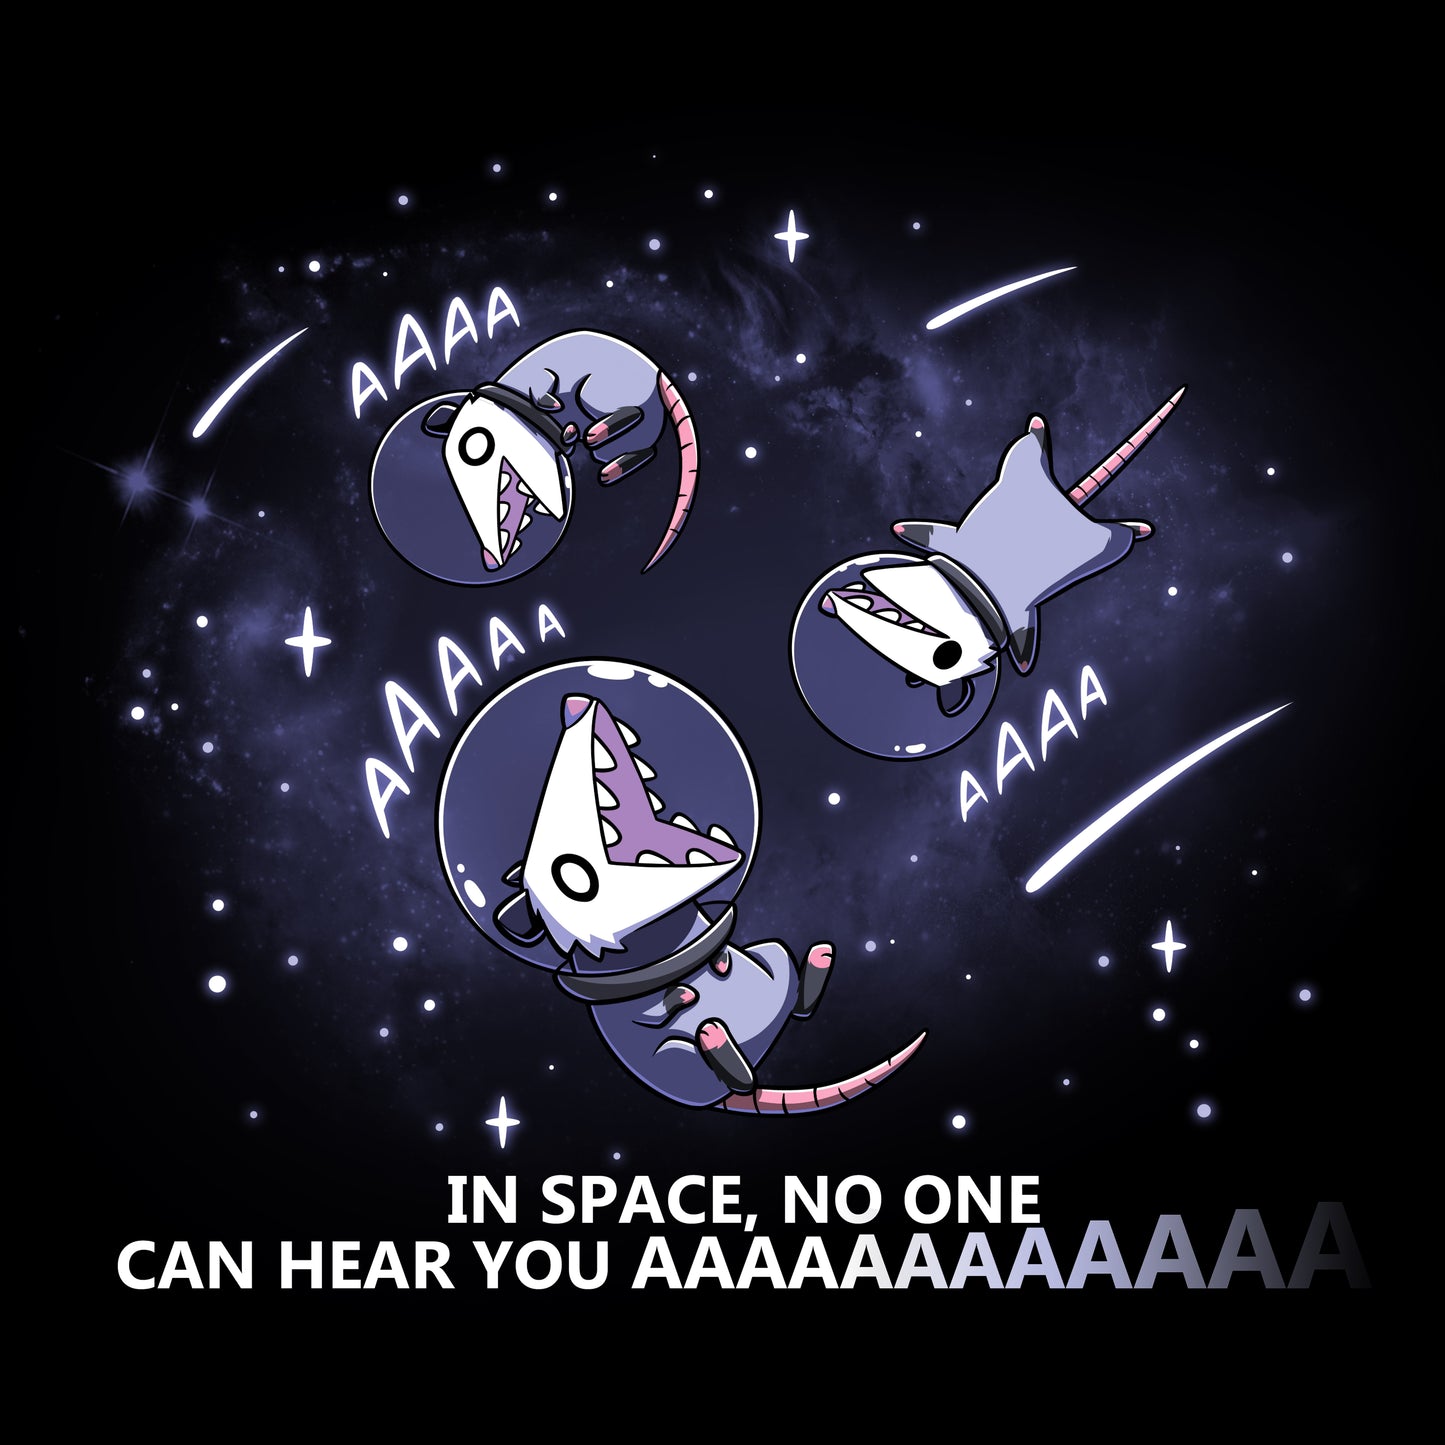 Cartoon sharks in space helmets, comically yelling, surrounded by stars with the caption "In Space, No One Can Hear You AAAAAA," on a TeeTurtle Super Soft Ringspun Cotton Women's T-Shirt.